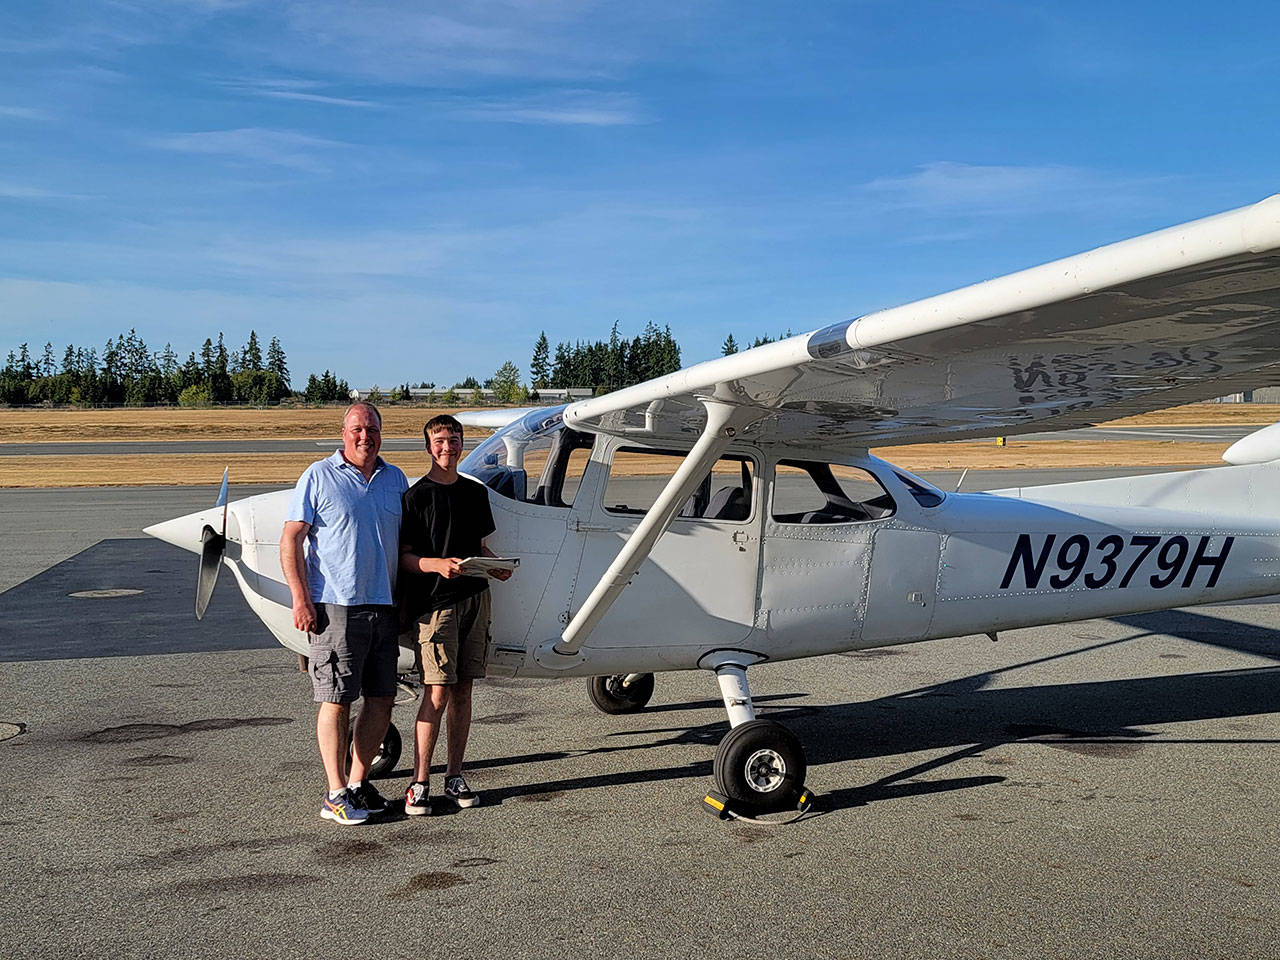 Cadet Kade Kirsch, pictured here with his father Matt Kirsch, completed his first powered solo flight on Aug. 10. Submitted photos